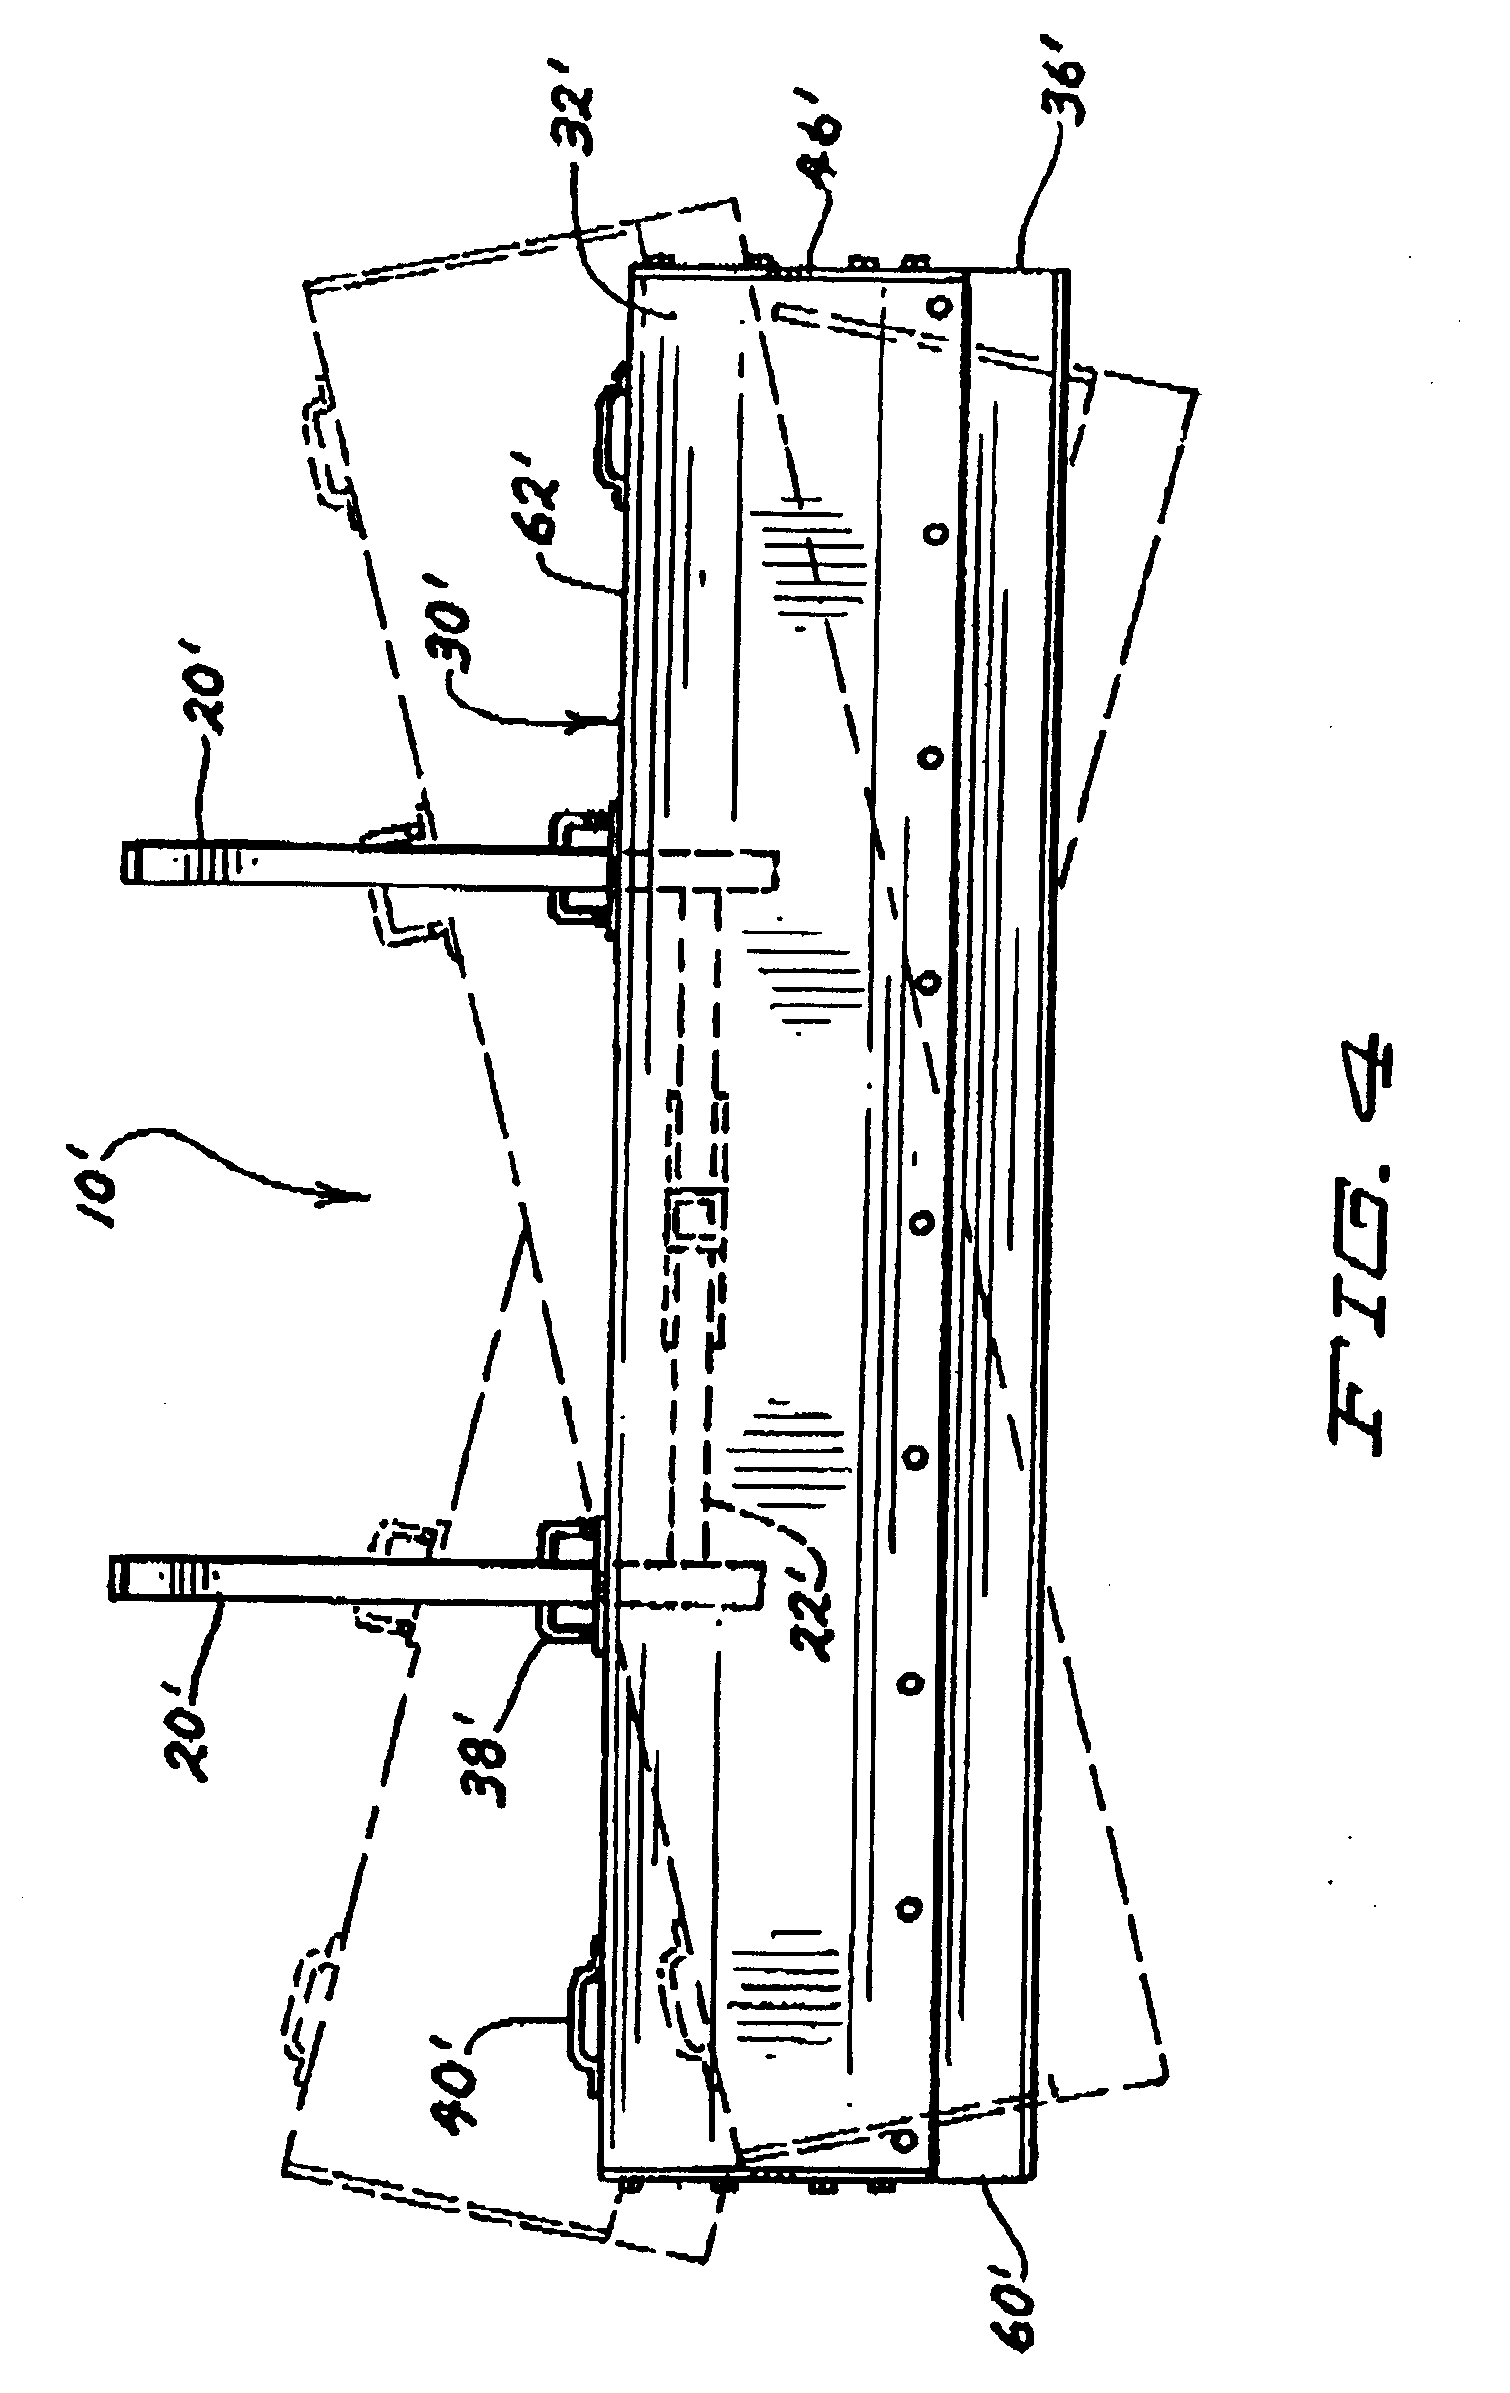 Plow blade having integrally formed attachment channel